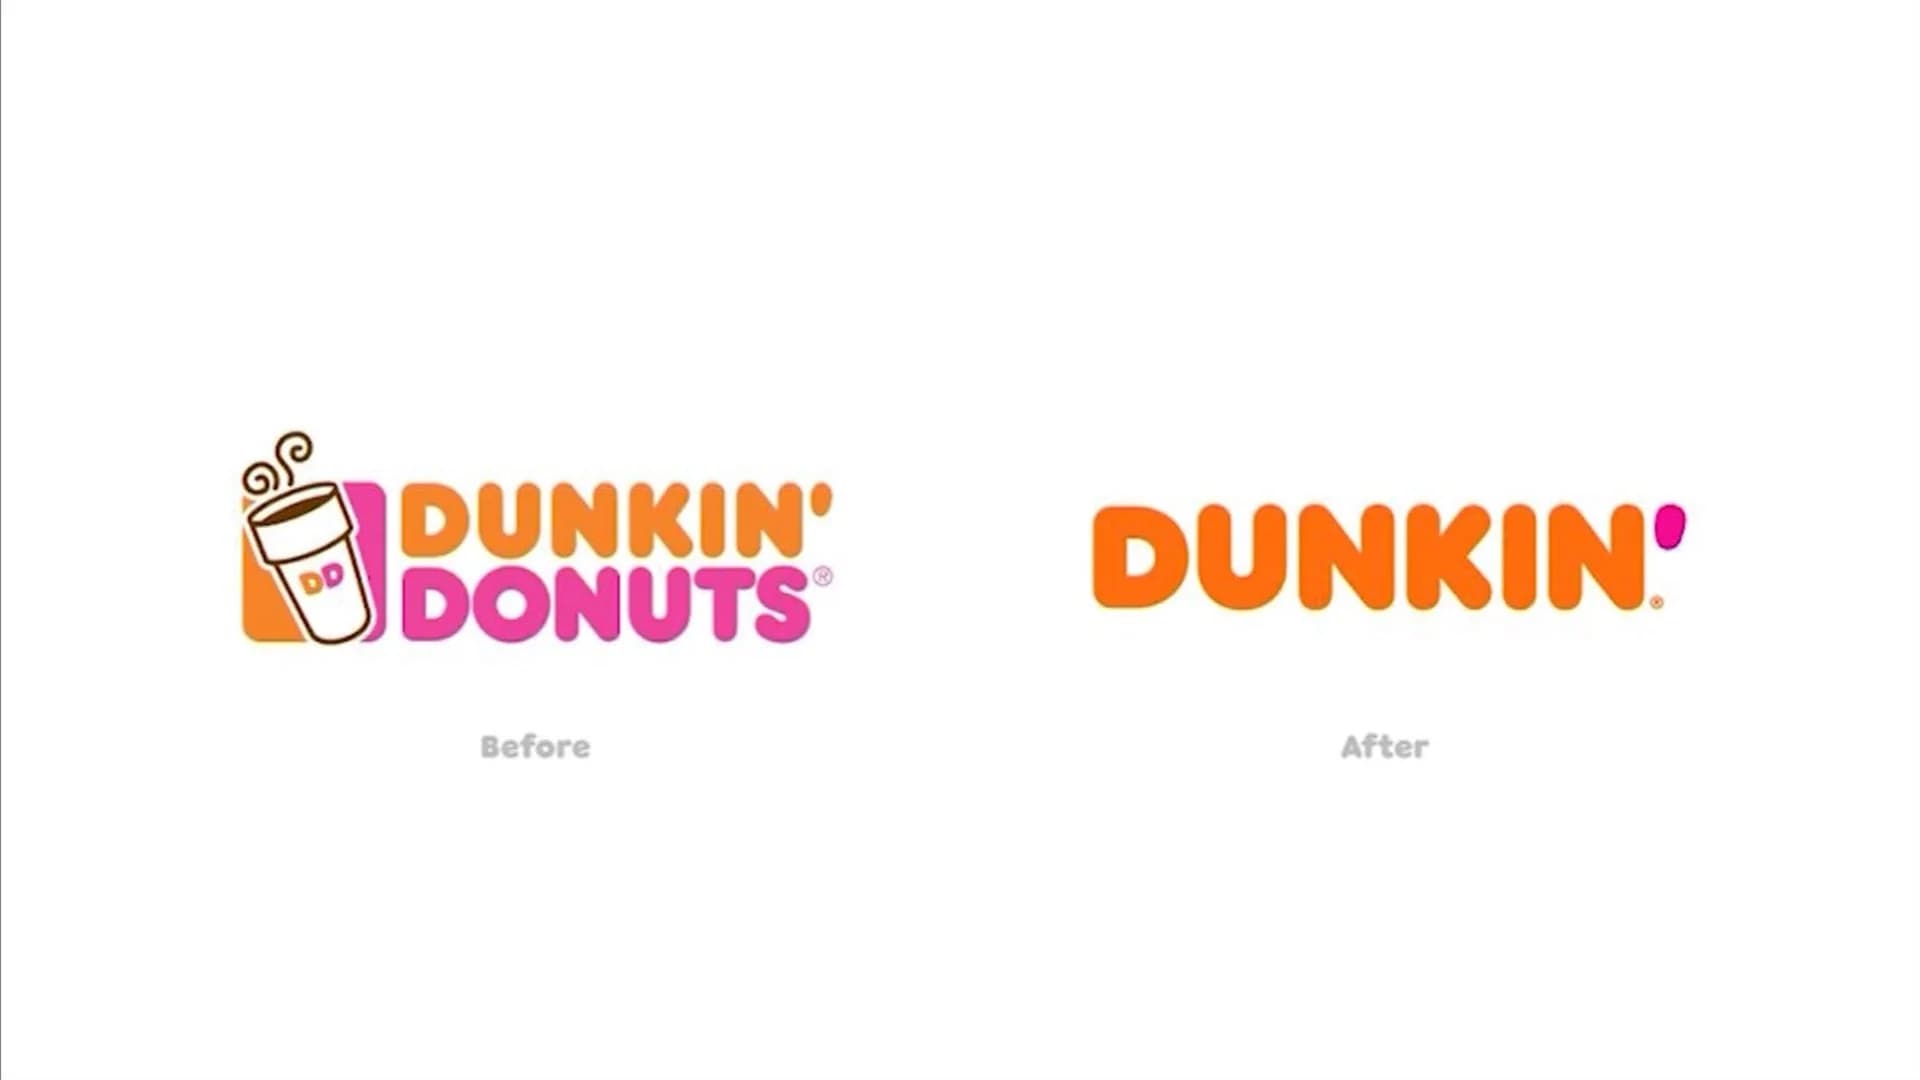 Dunkin' Donuts removing "Donuts" from name starting next year